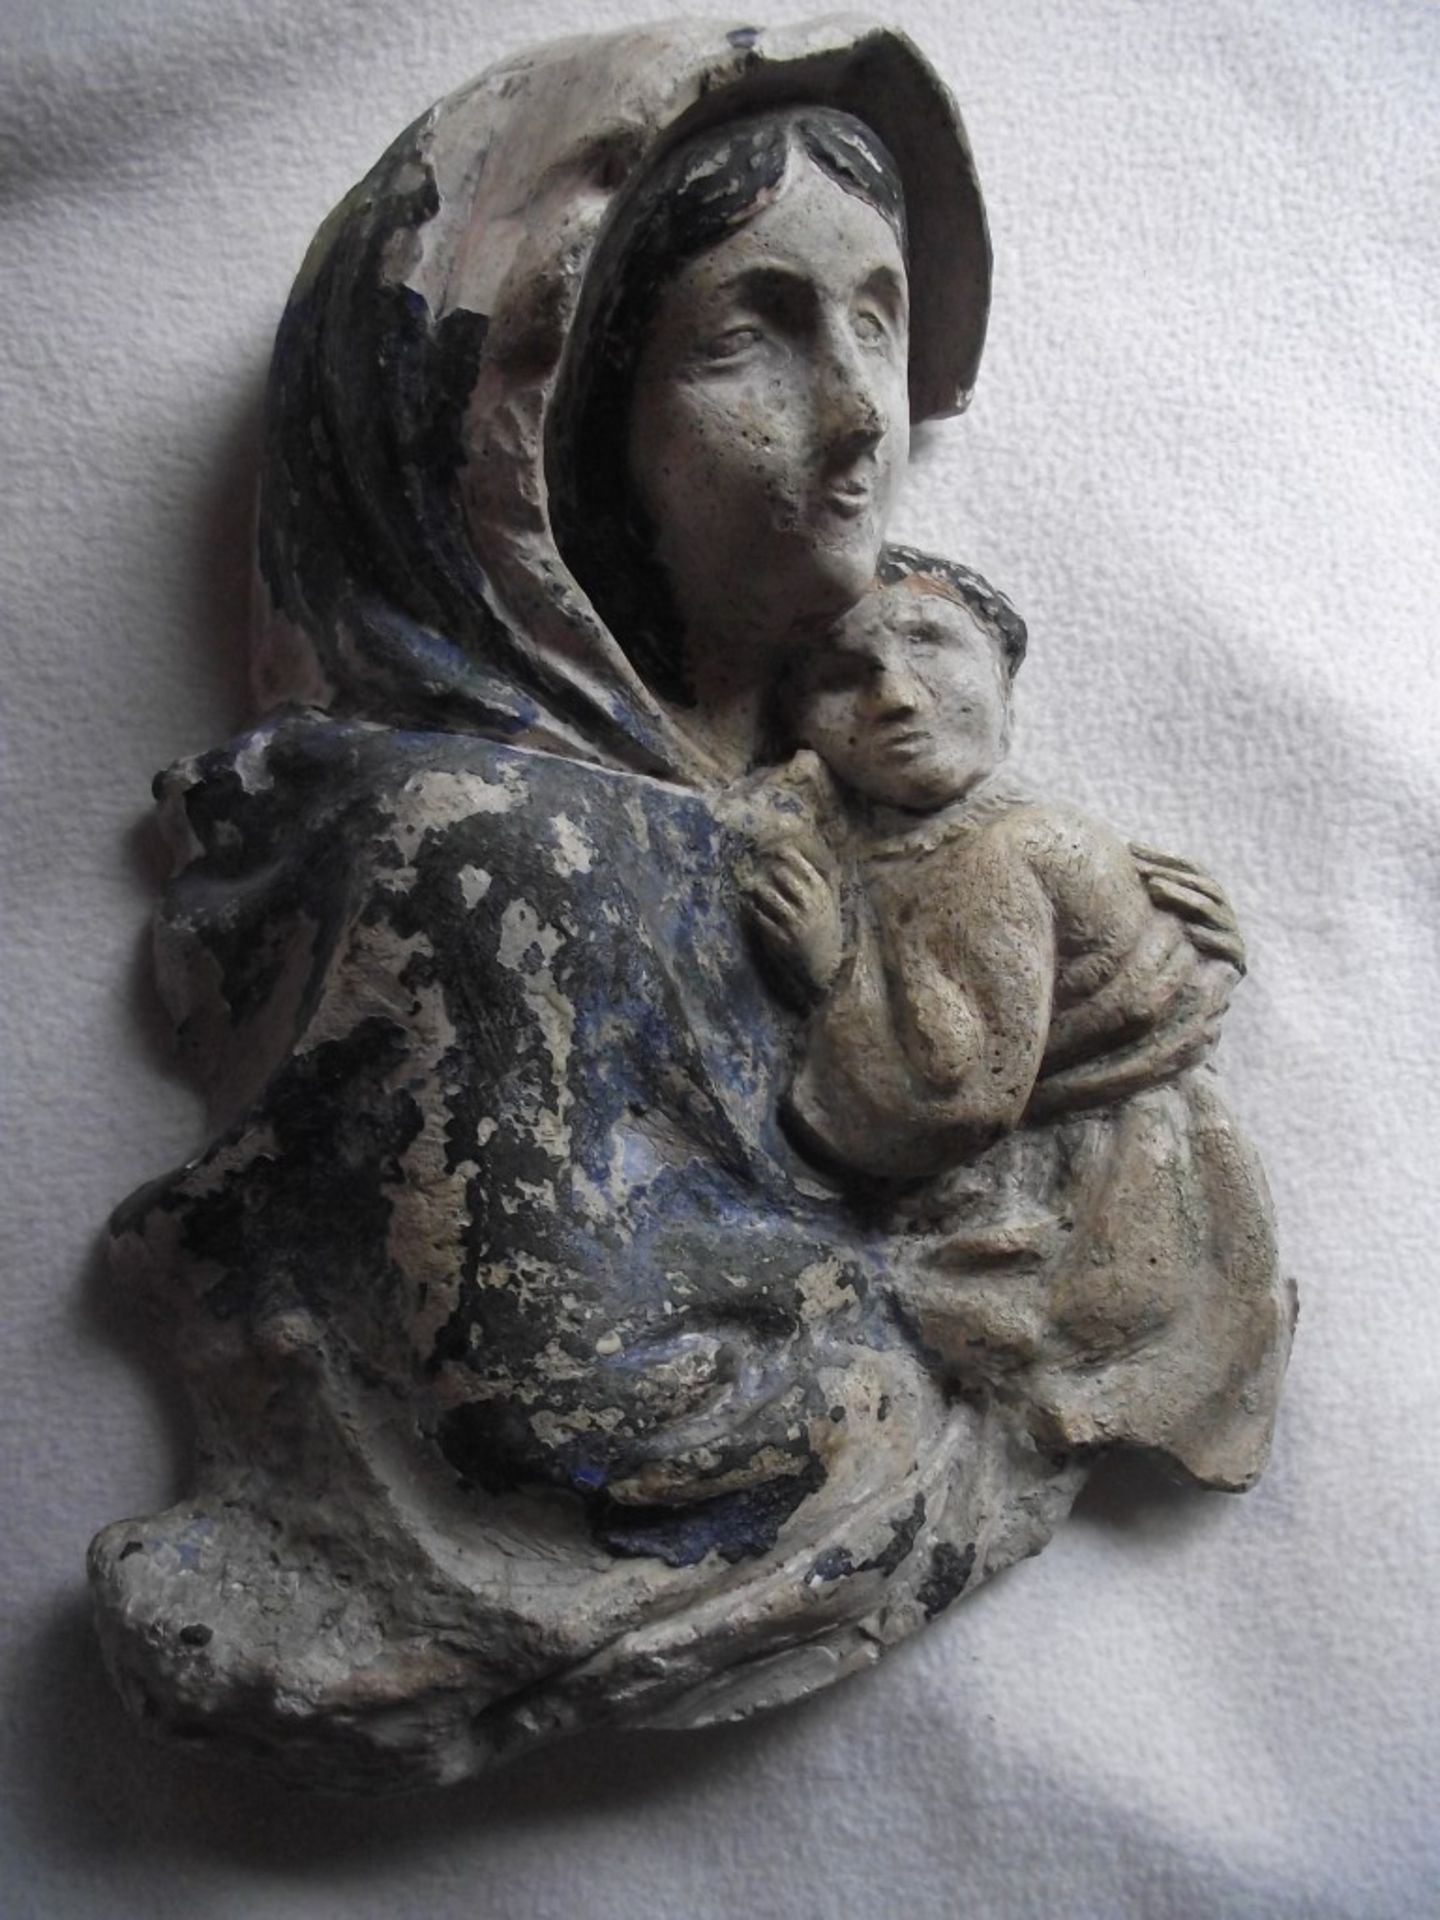 Antique Madonna & Child Wall Hanging Figure - 11 3/4"" High. - Image 12 of 21